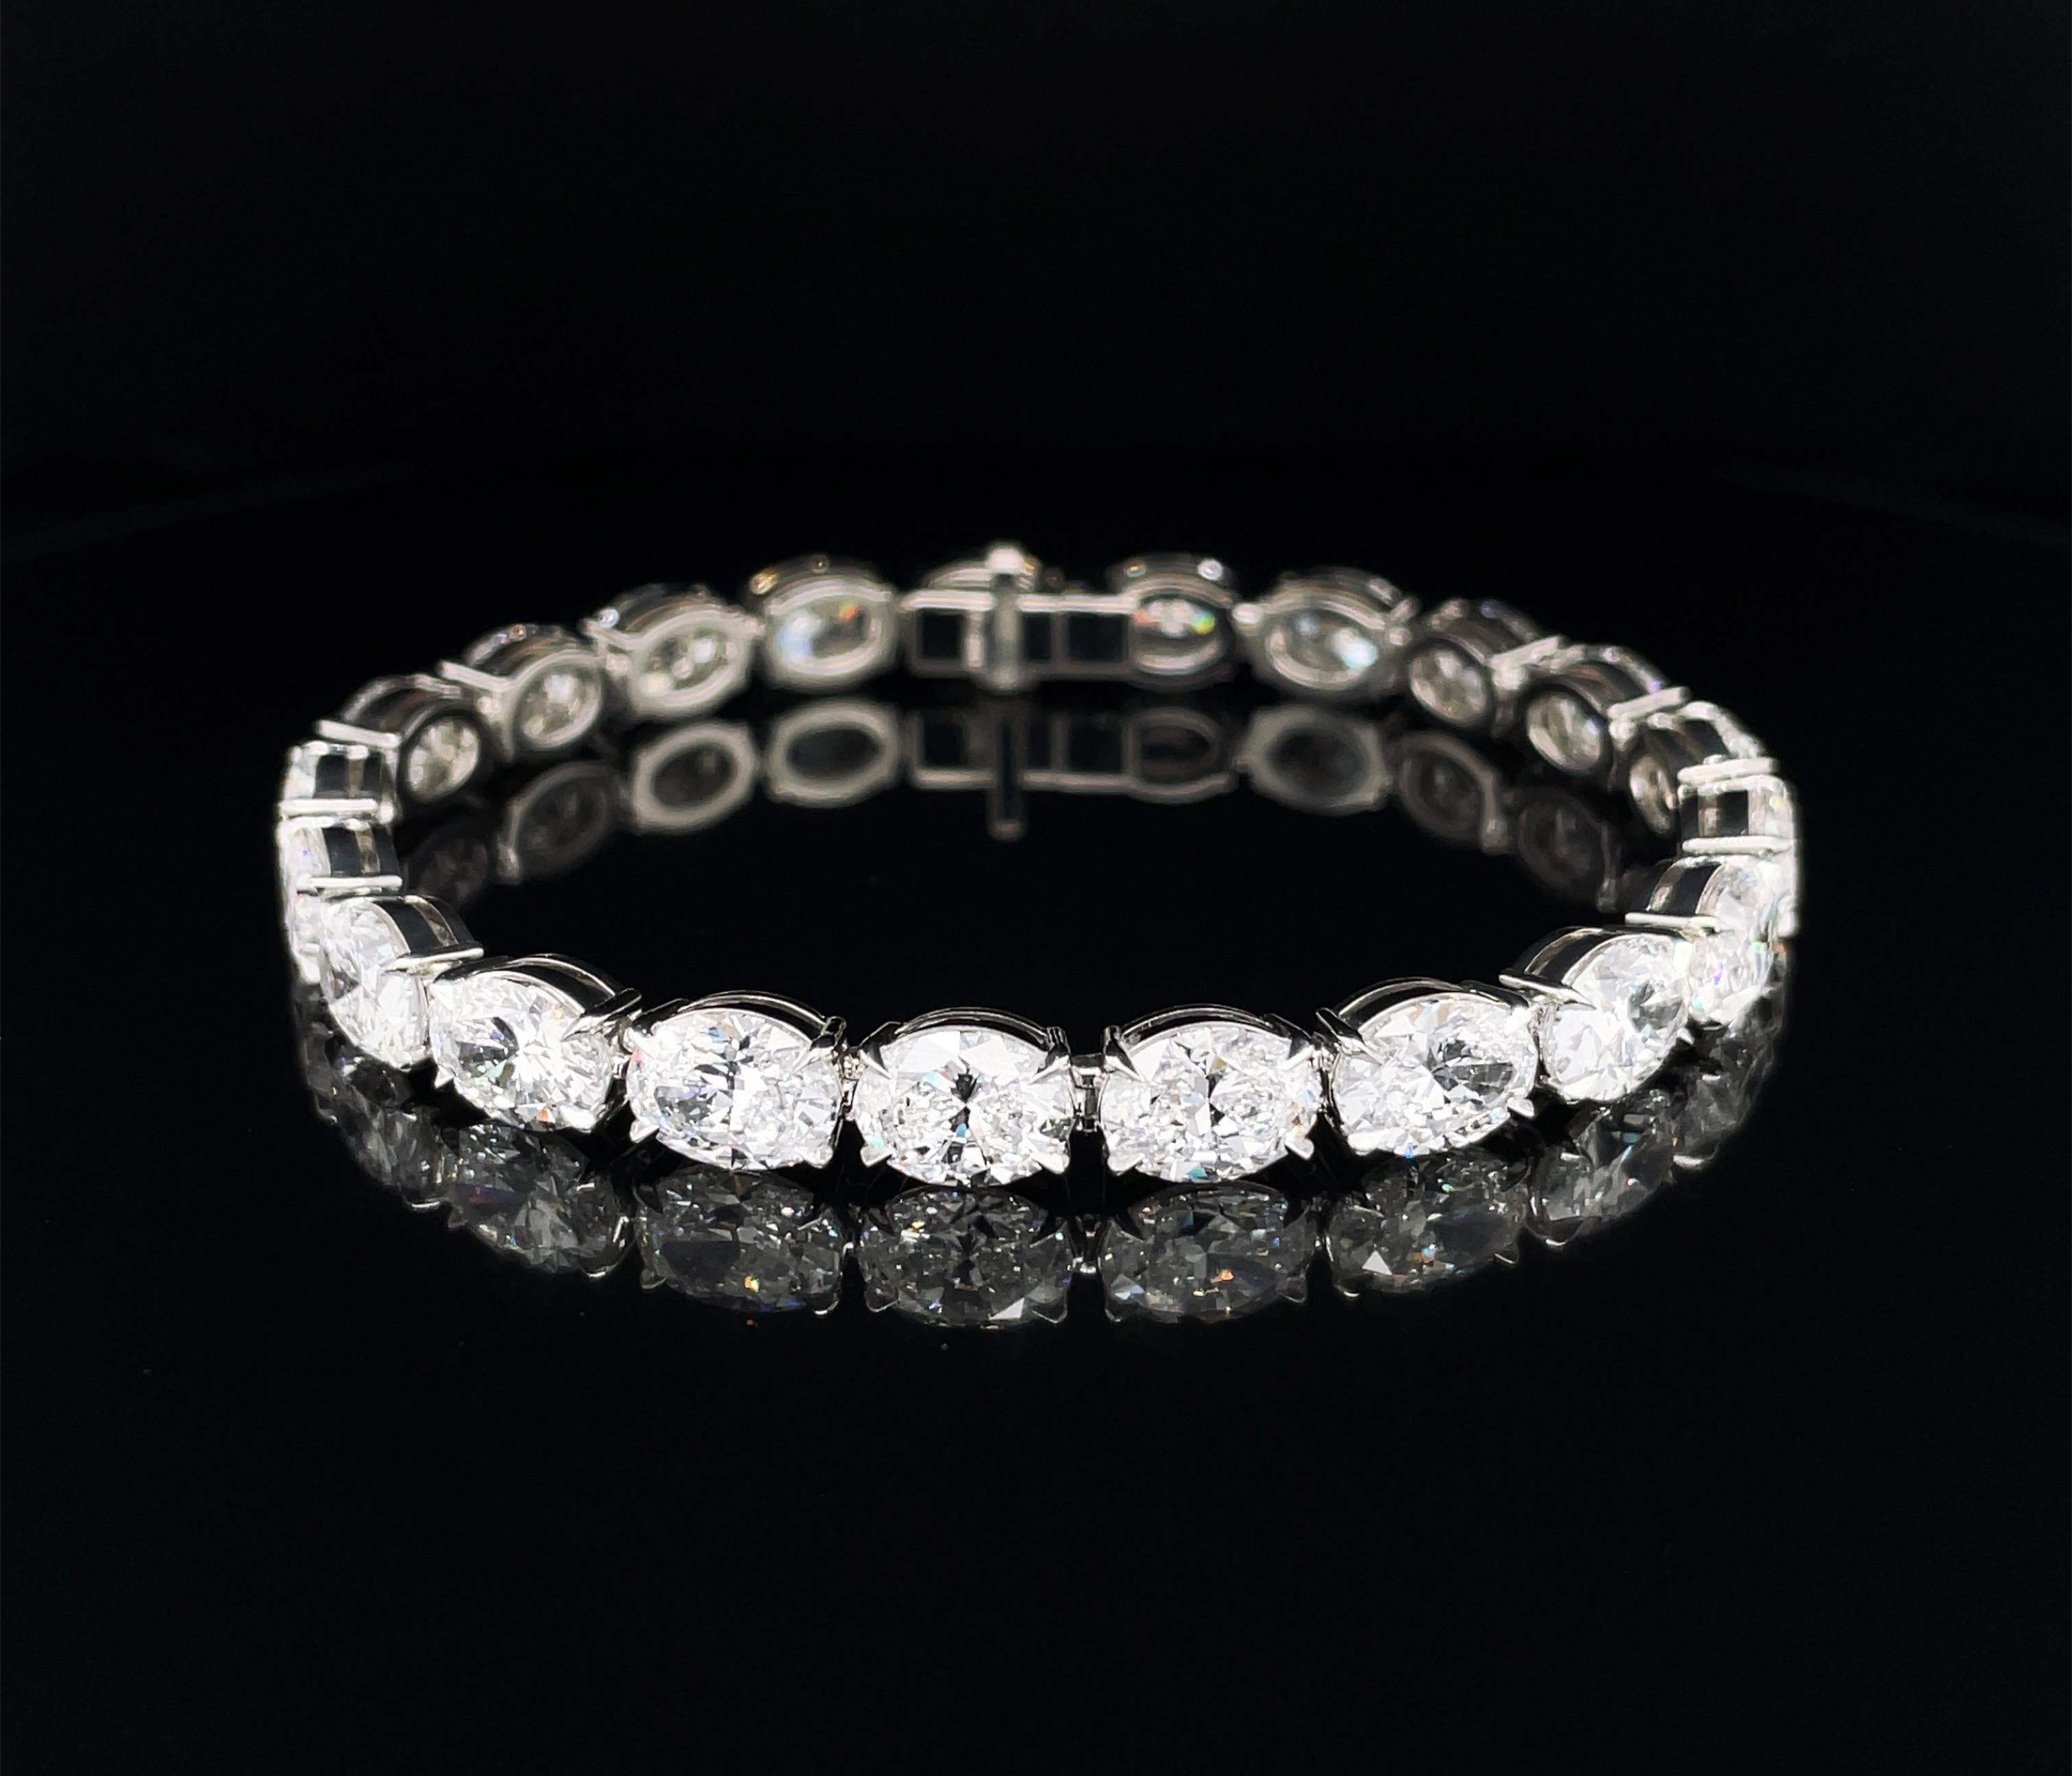 Oval Cut Diamond Bracelet, 21.23 Carats Total Weight GIA Certified For Sale